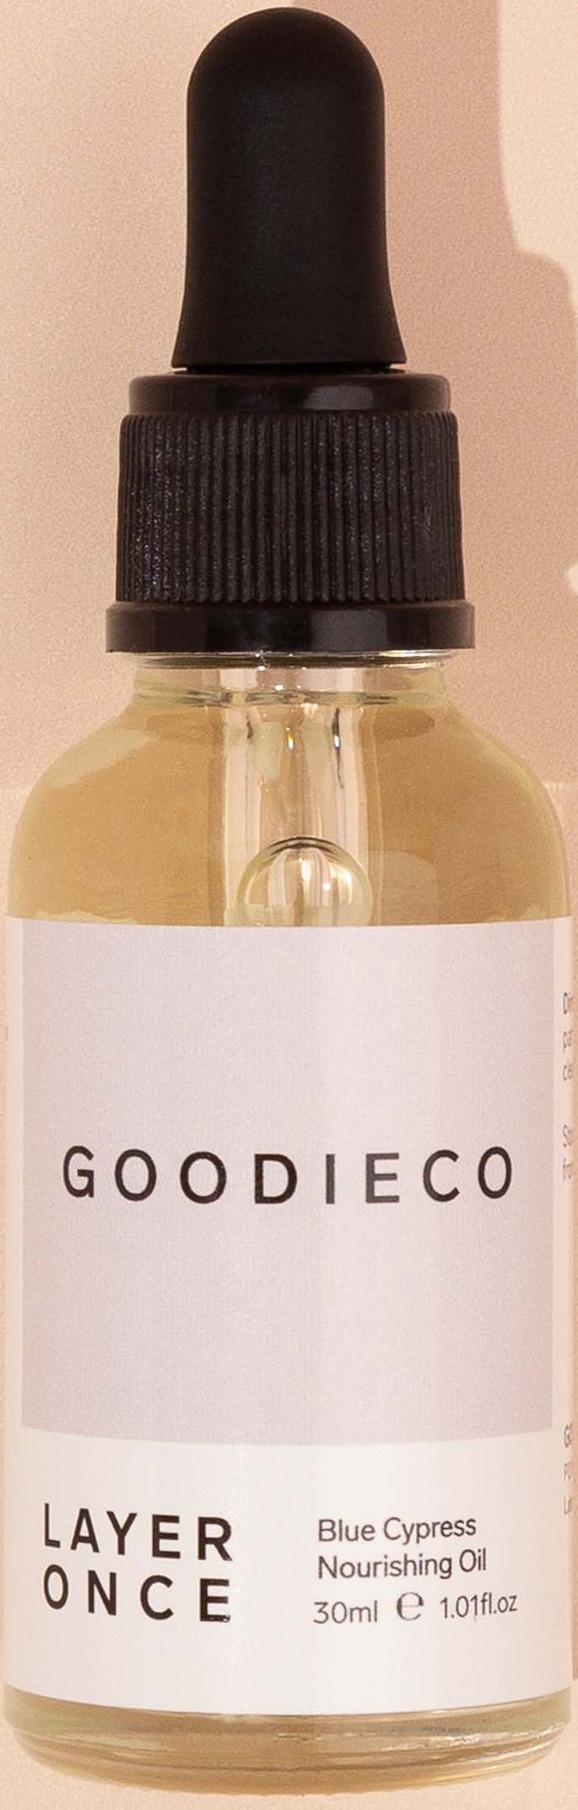 goodieco Layer Once Nourishing Oil